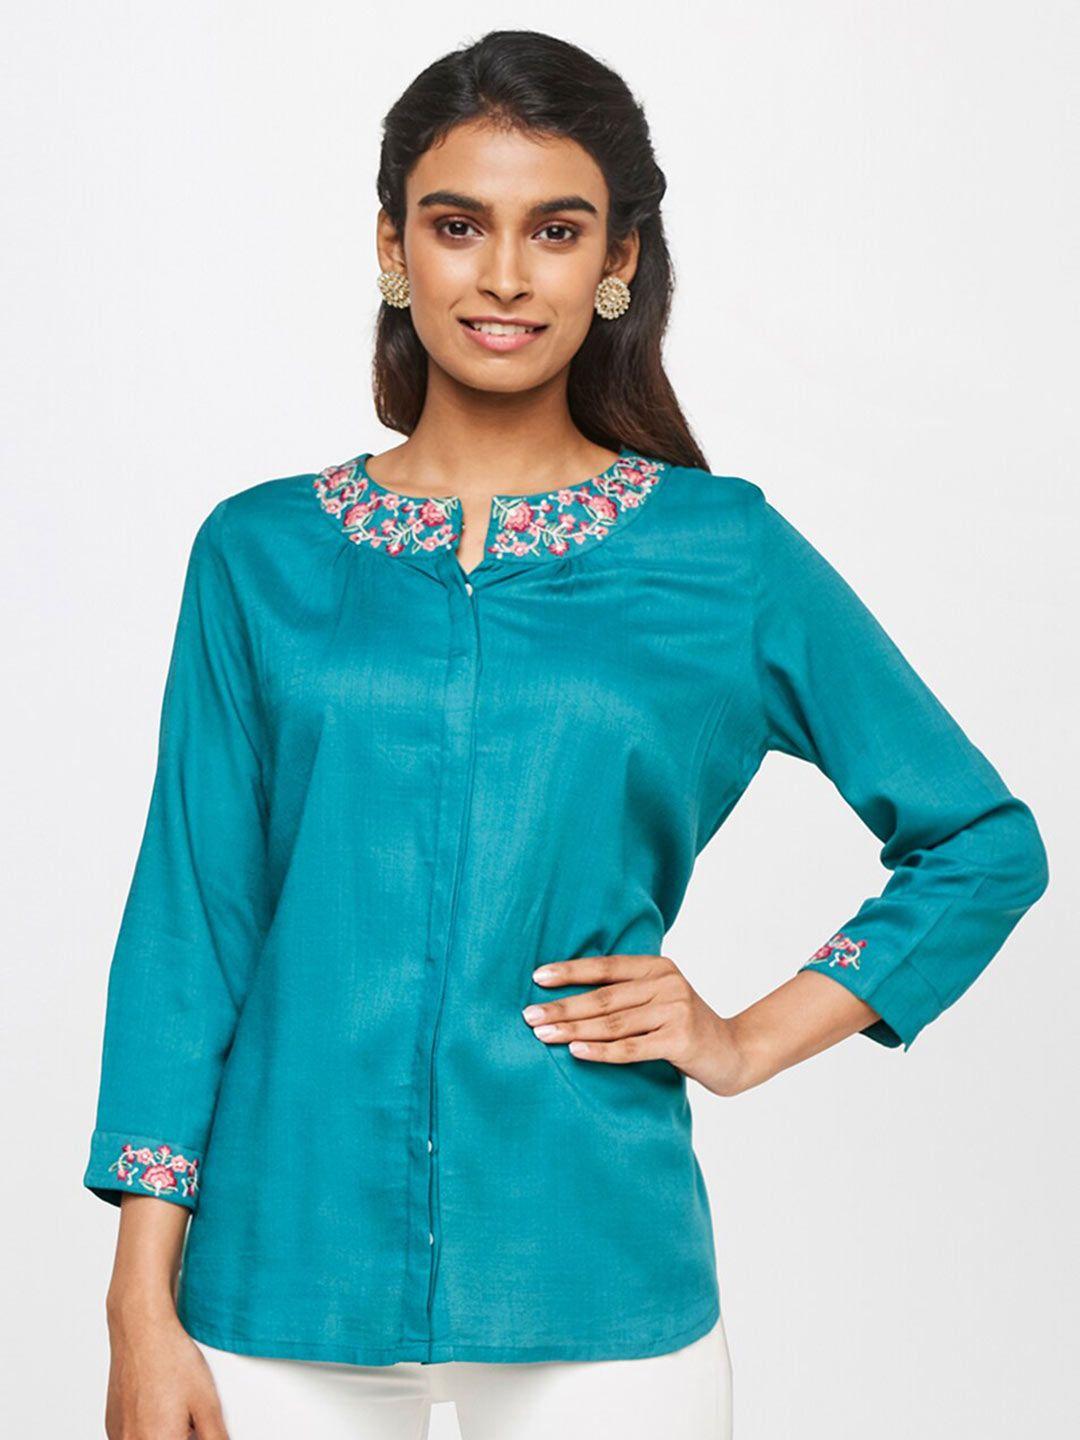 global-desi-women-teal-solid-neck-embroidered-top